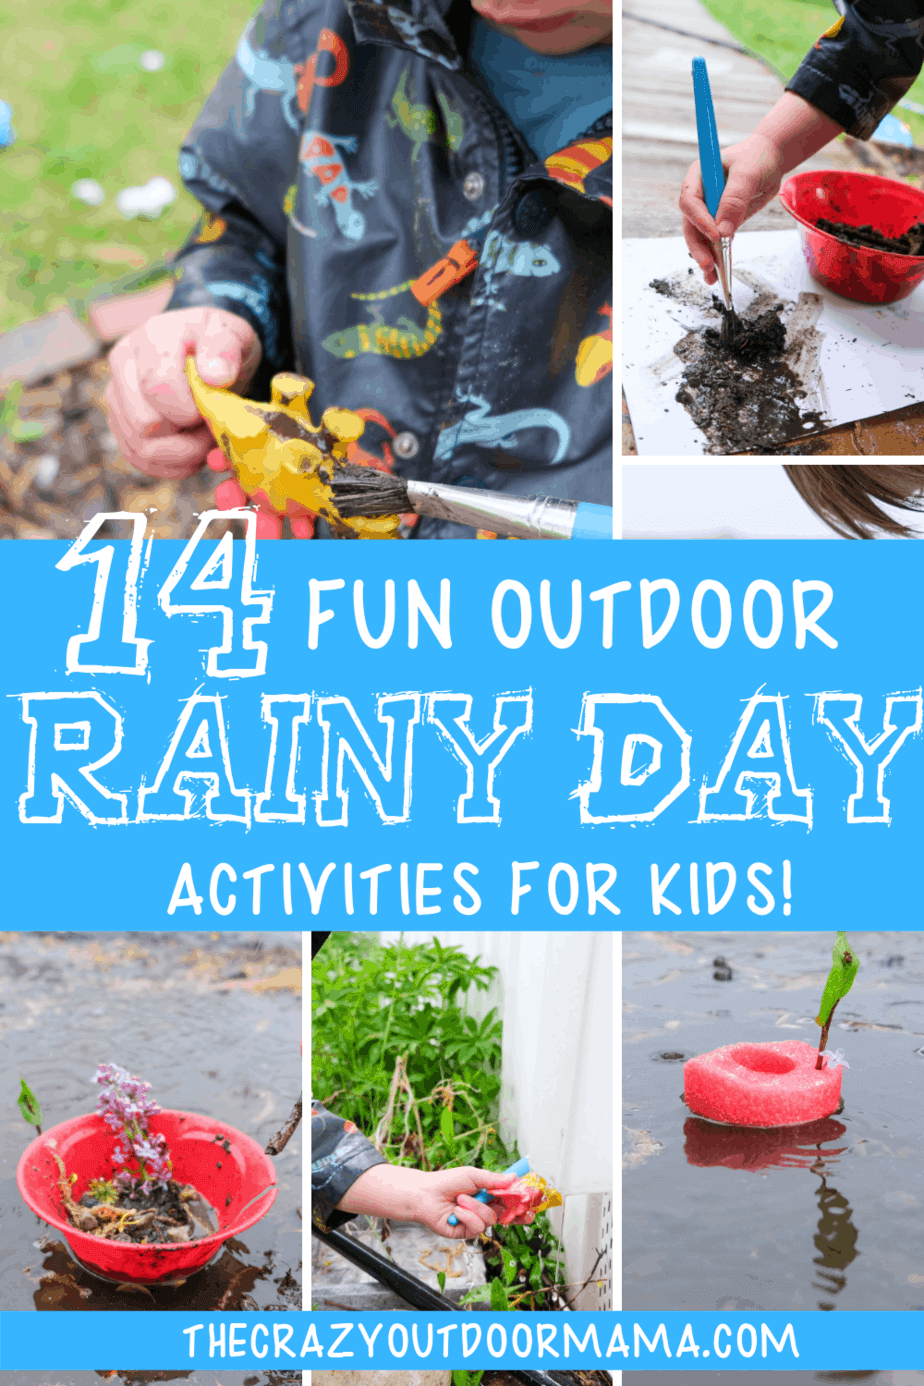 14 Fun OUTDOOR Rainy Day Play Activities for Kids (Toddlers Too!!) – The Crazy Outdoor Mama - 14 Fun OUTDOOR Rainy Day Play Activities for Kids (Toddlers Too!!) – The Crazy Outdoor Mama -   17 rainy day diy For Teens ideas